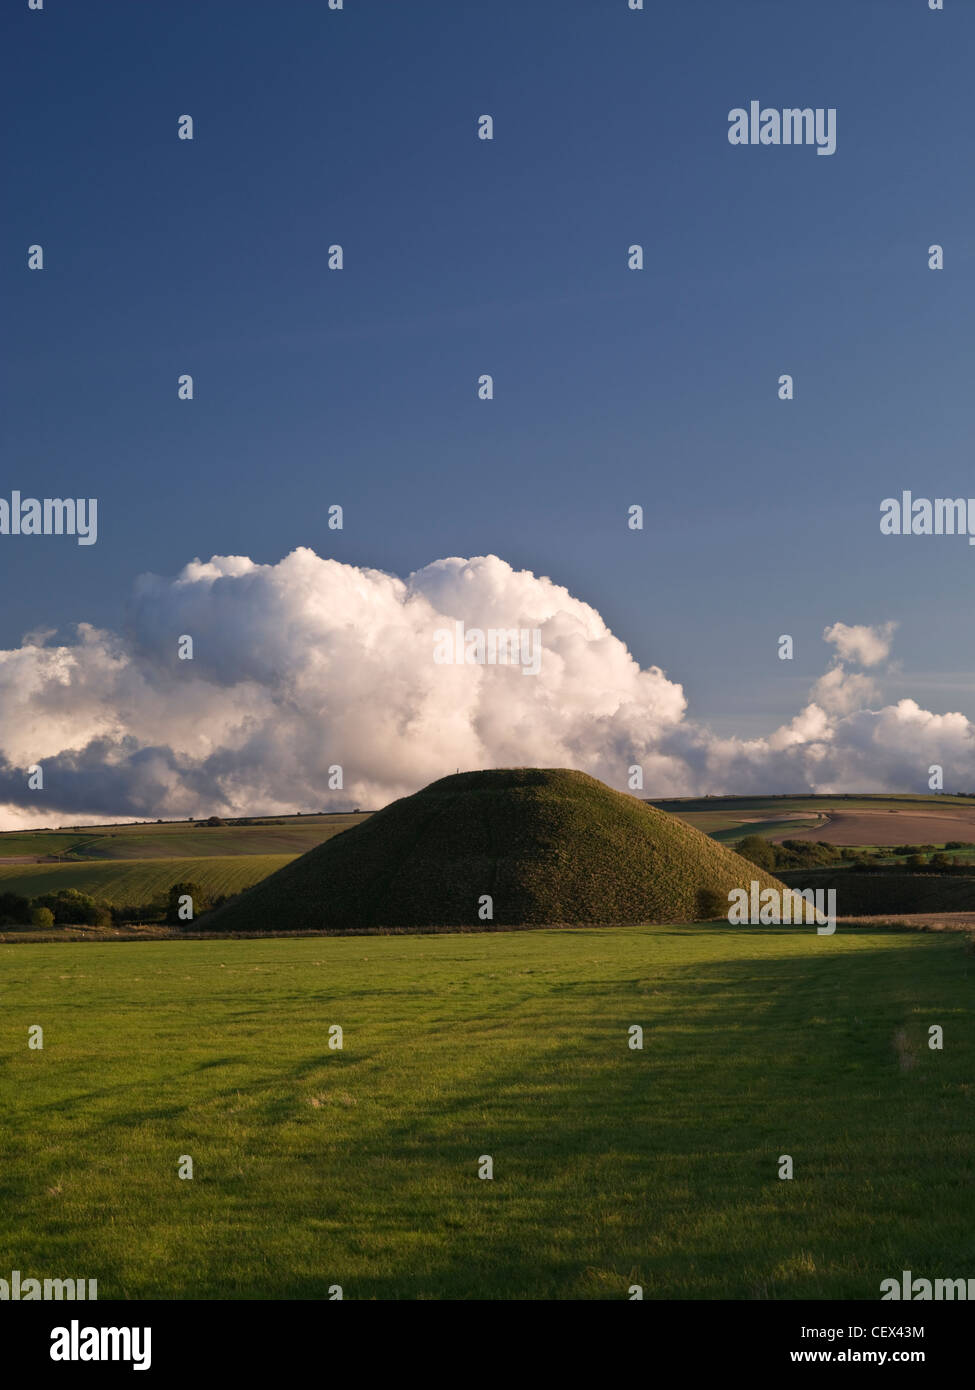 View of Silbury Hill, the tallest prehistoric human-made mound in Europe, against a bank of cloud on a clear evening. Stock Photo